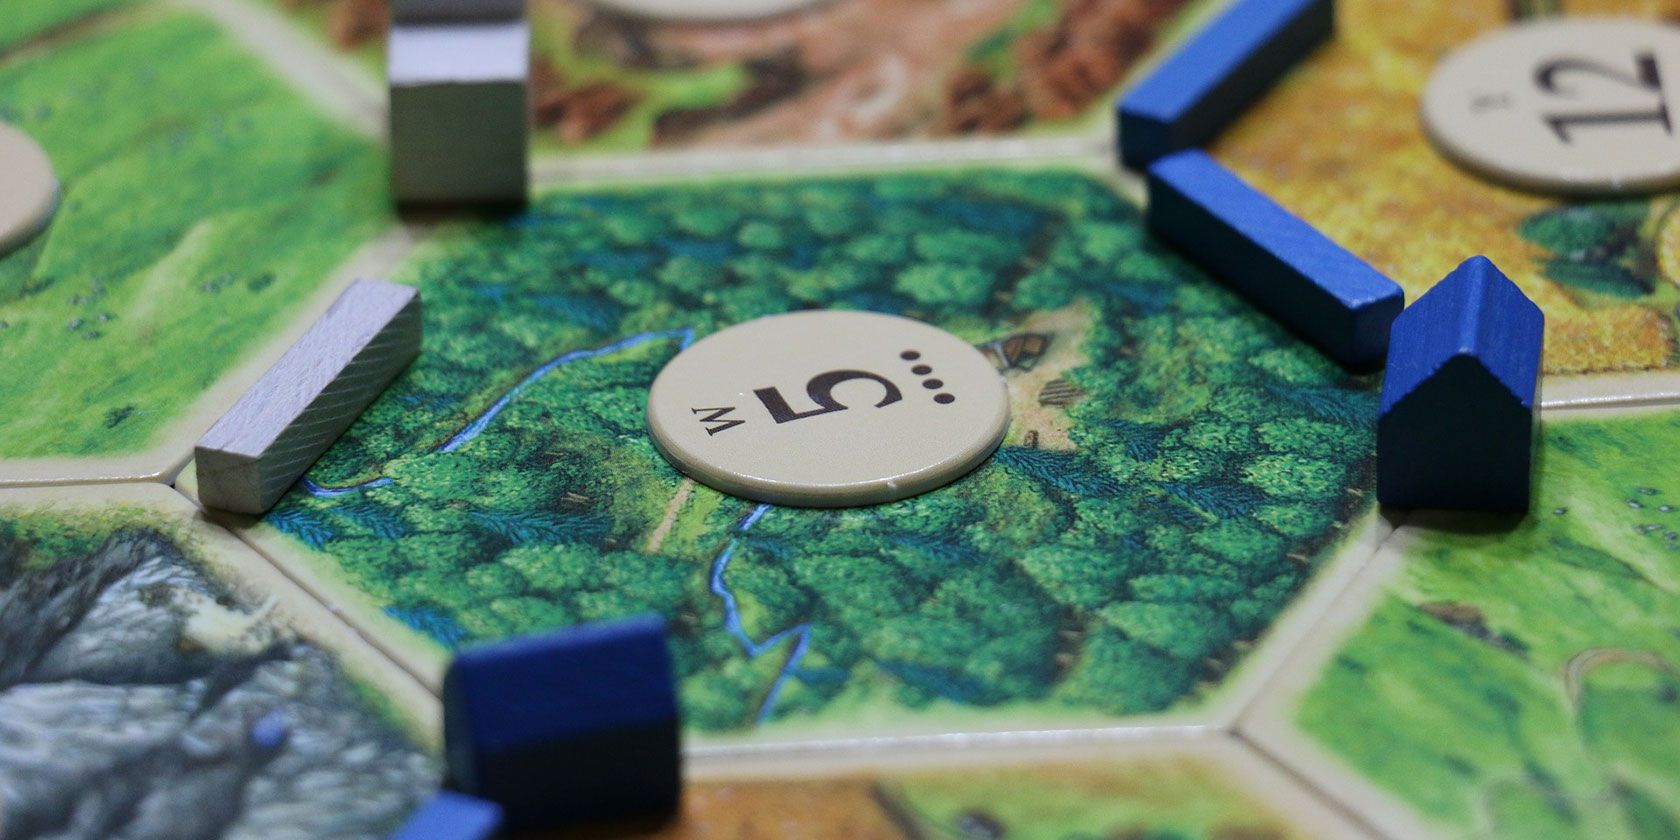 settlers of catan resources